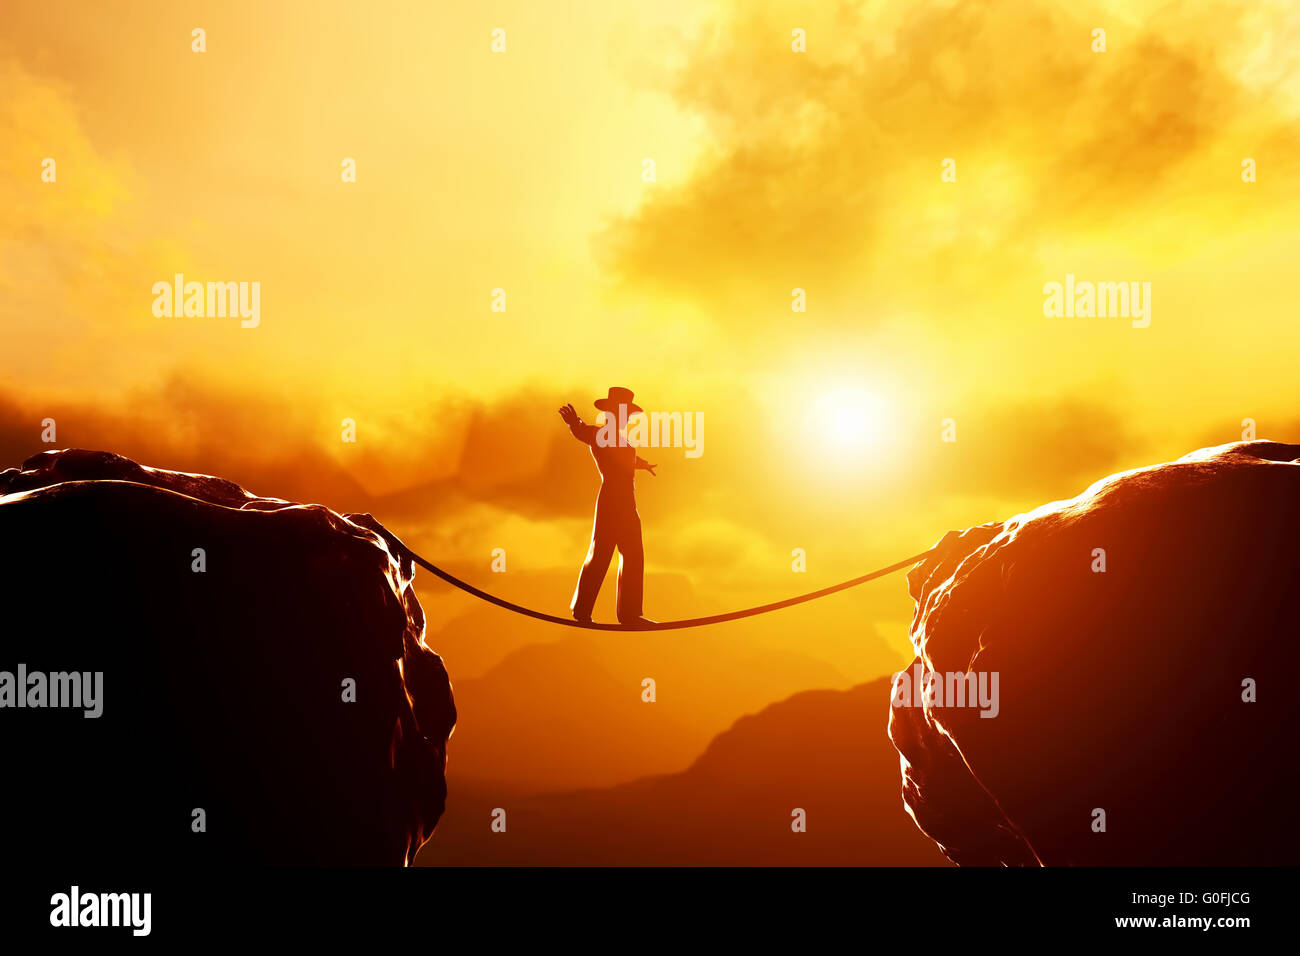 Man in hat walking and balancing on rope over precipice in mountains at sunset. Concept of business Stock Photo